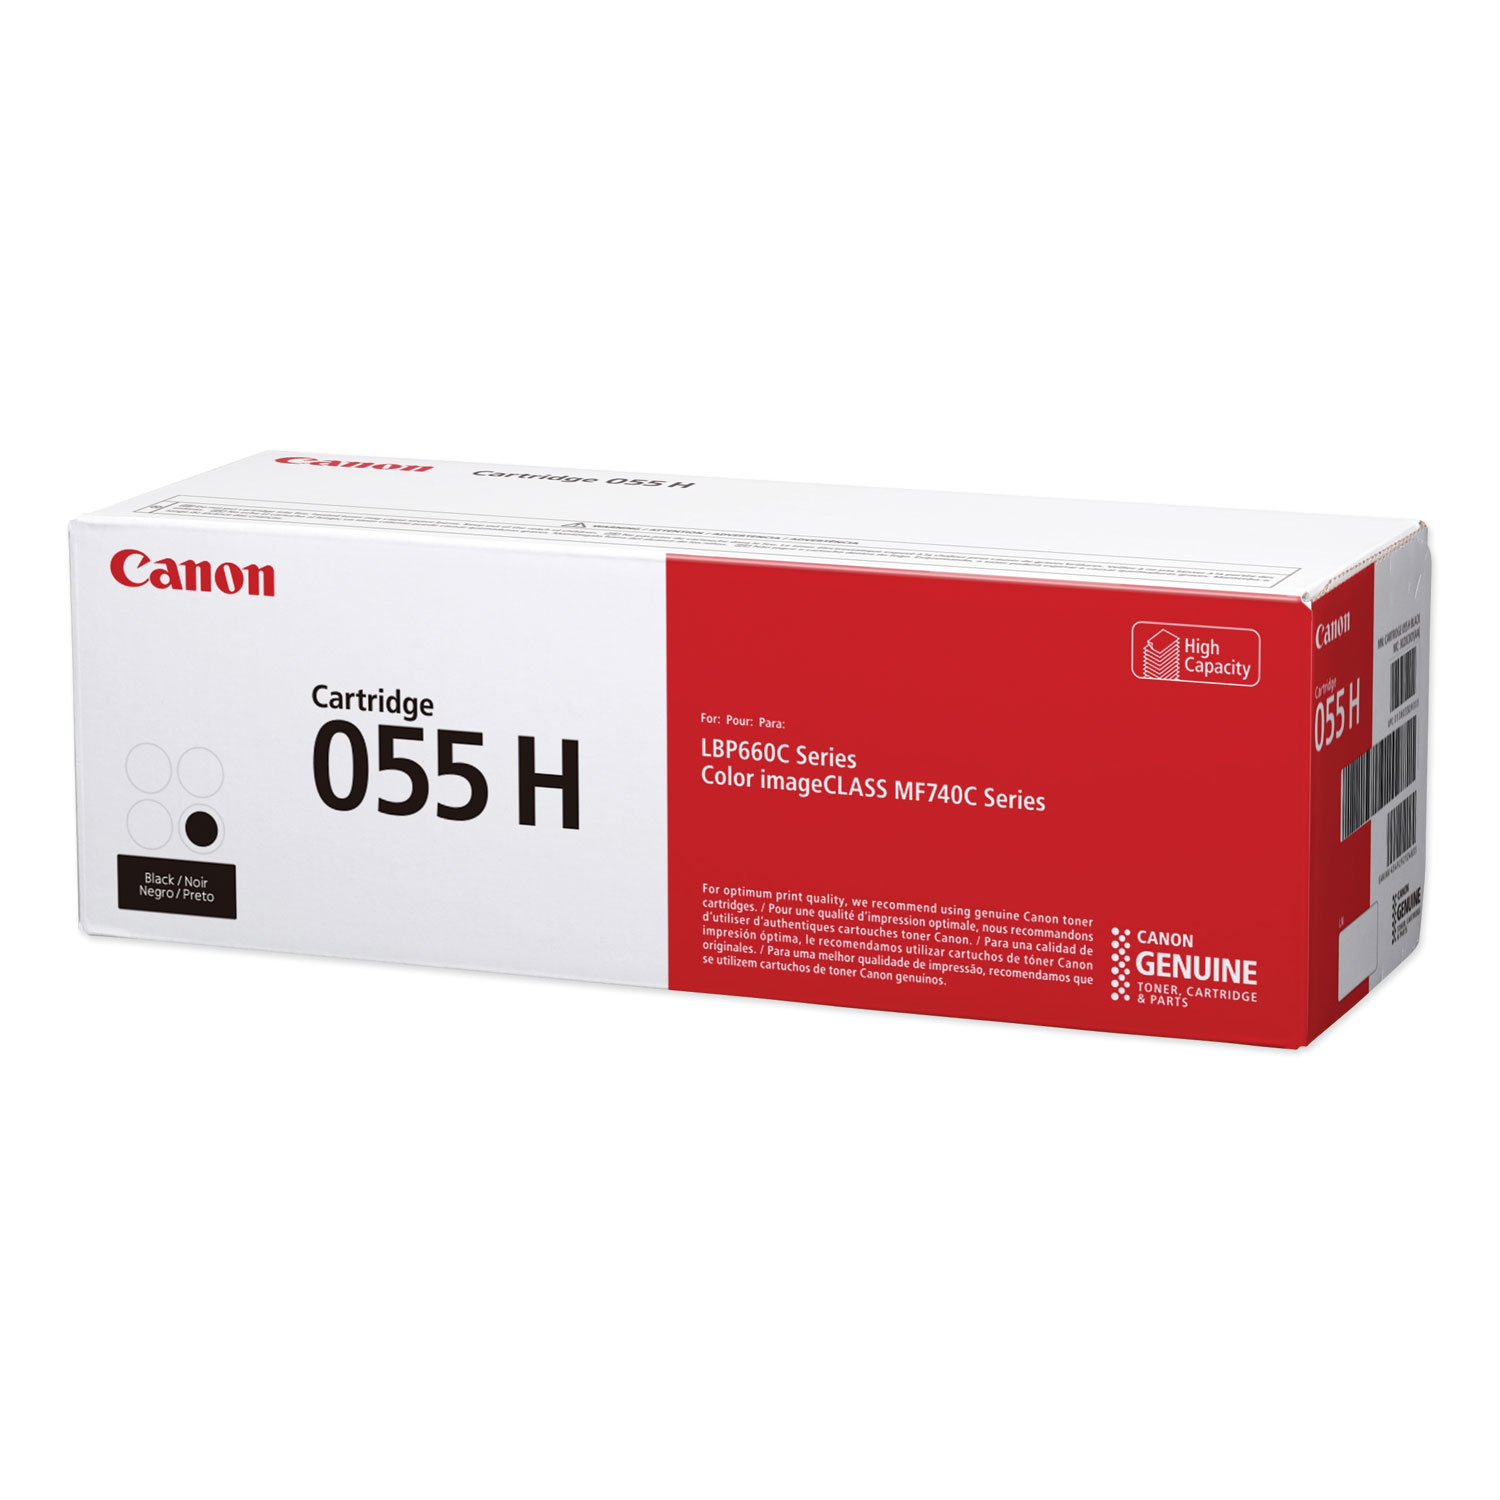  Canon 3020C001 3020C001 (055H) High-Yield Toner, 7,600 Page-Yield, Black (CNM3020C001) 